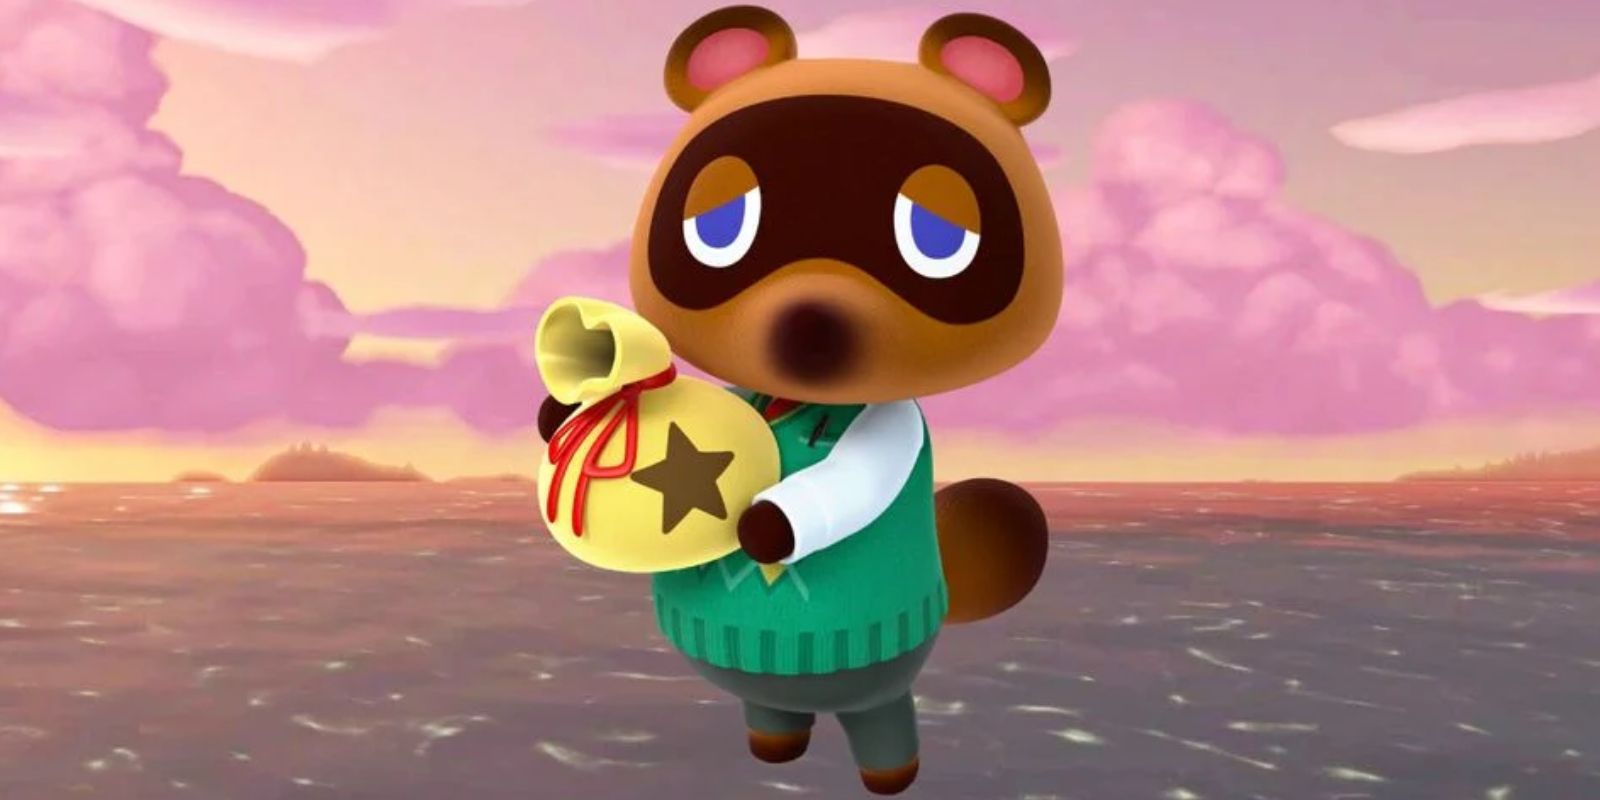 Tom Nook holding a yellow bag while standing in the middle of a road